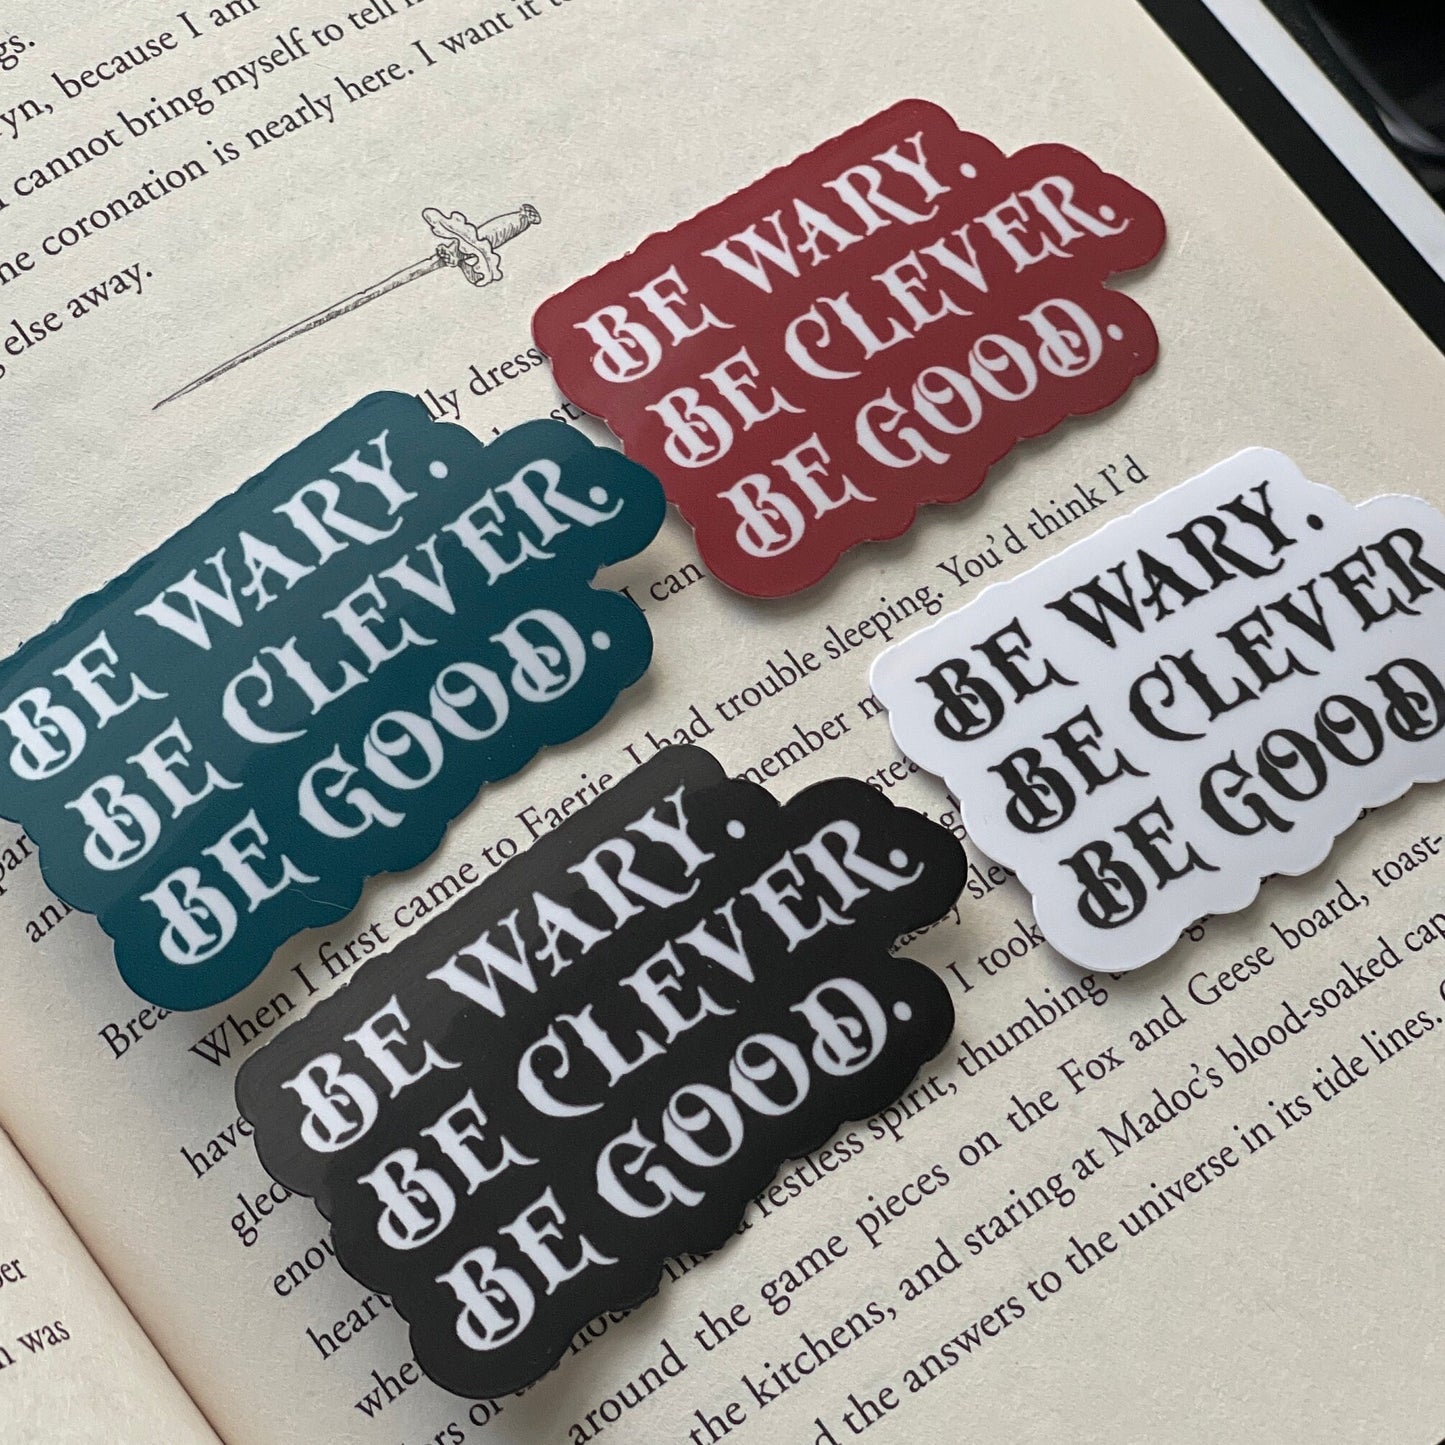 Be Wary Be Clever Be Good Sticker